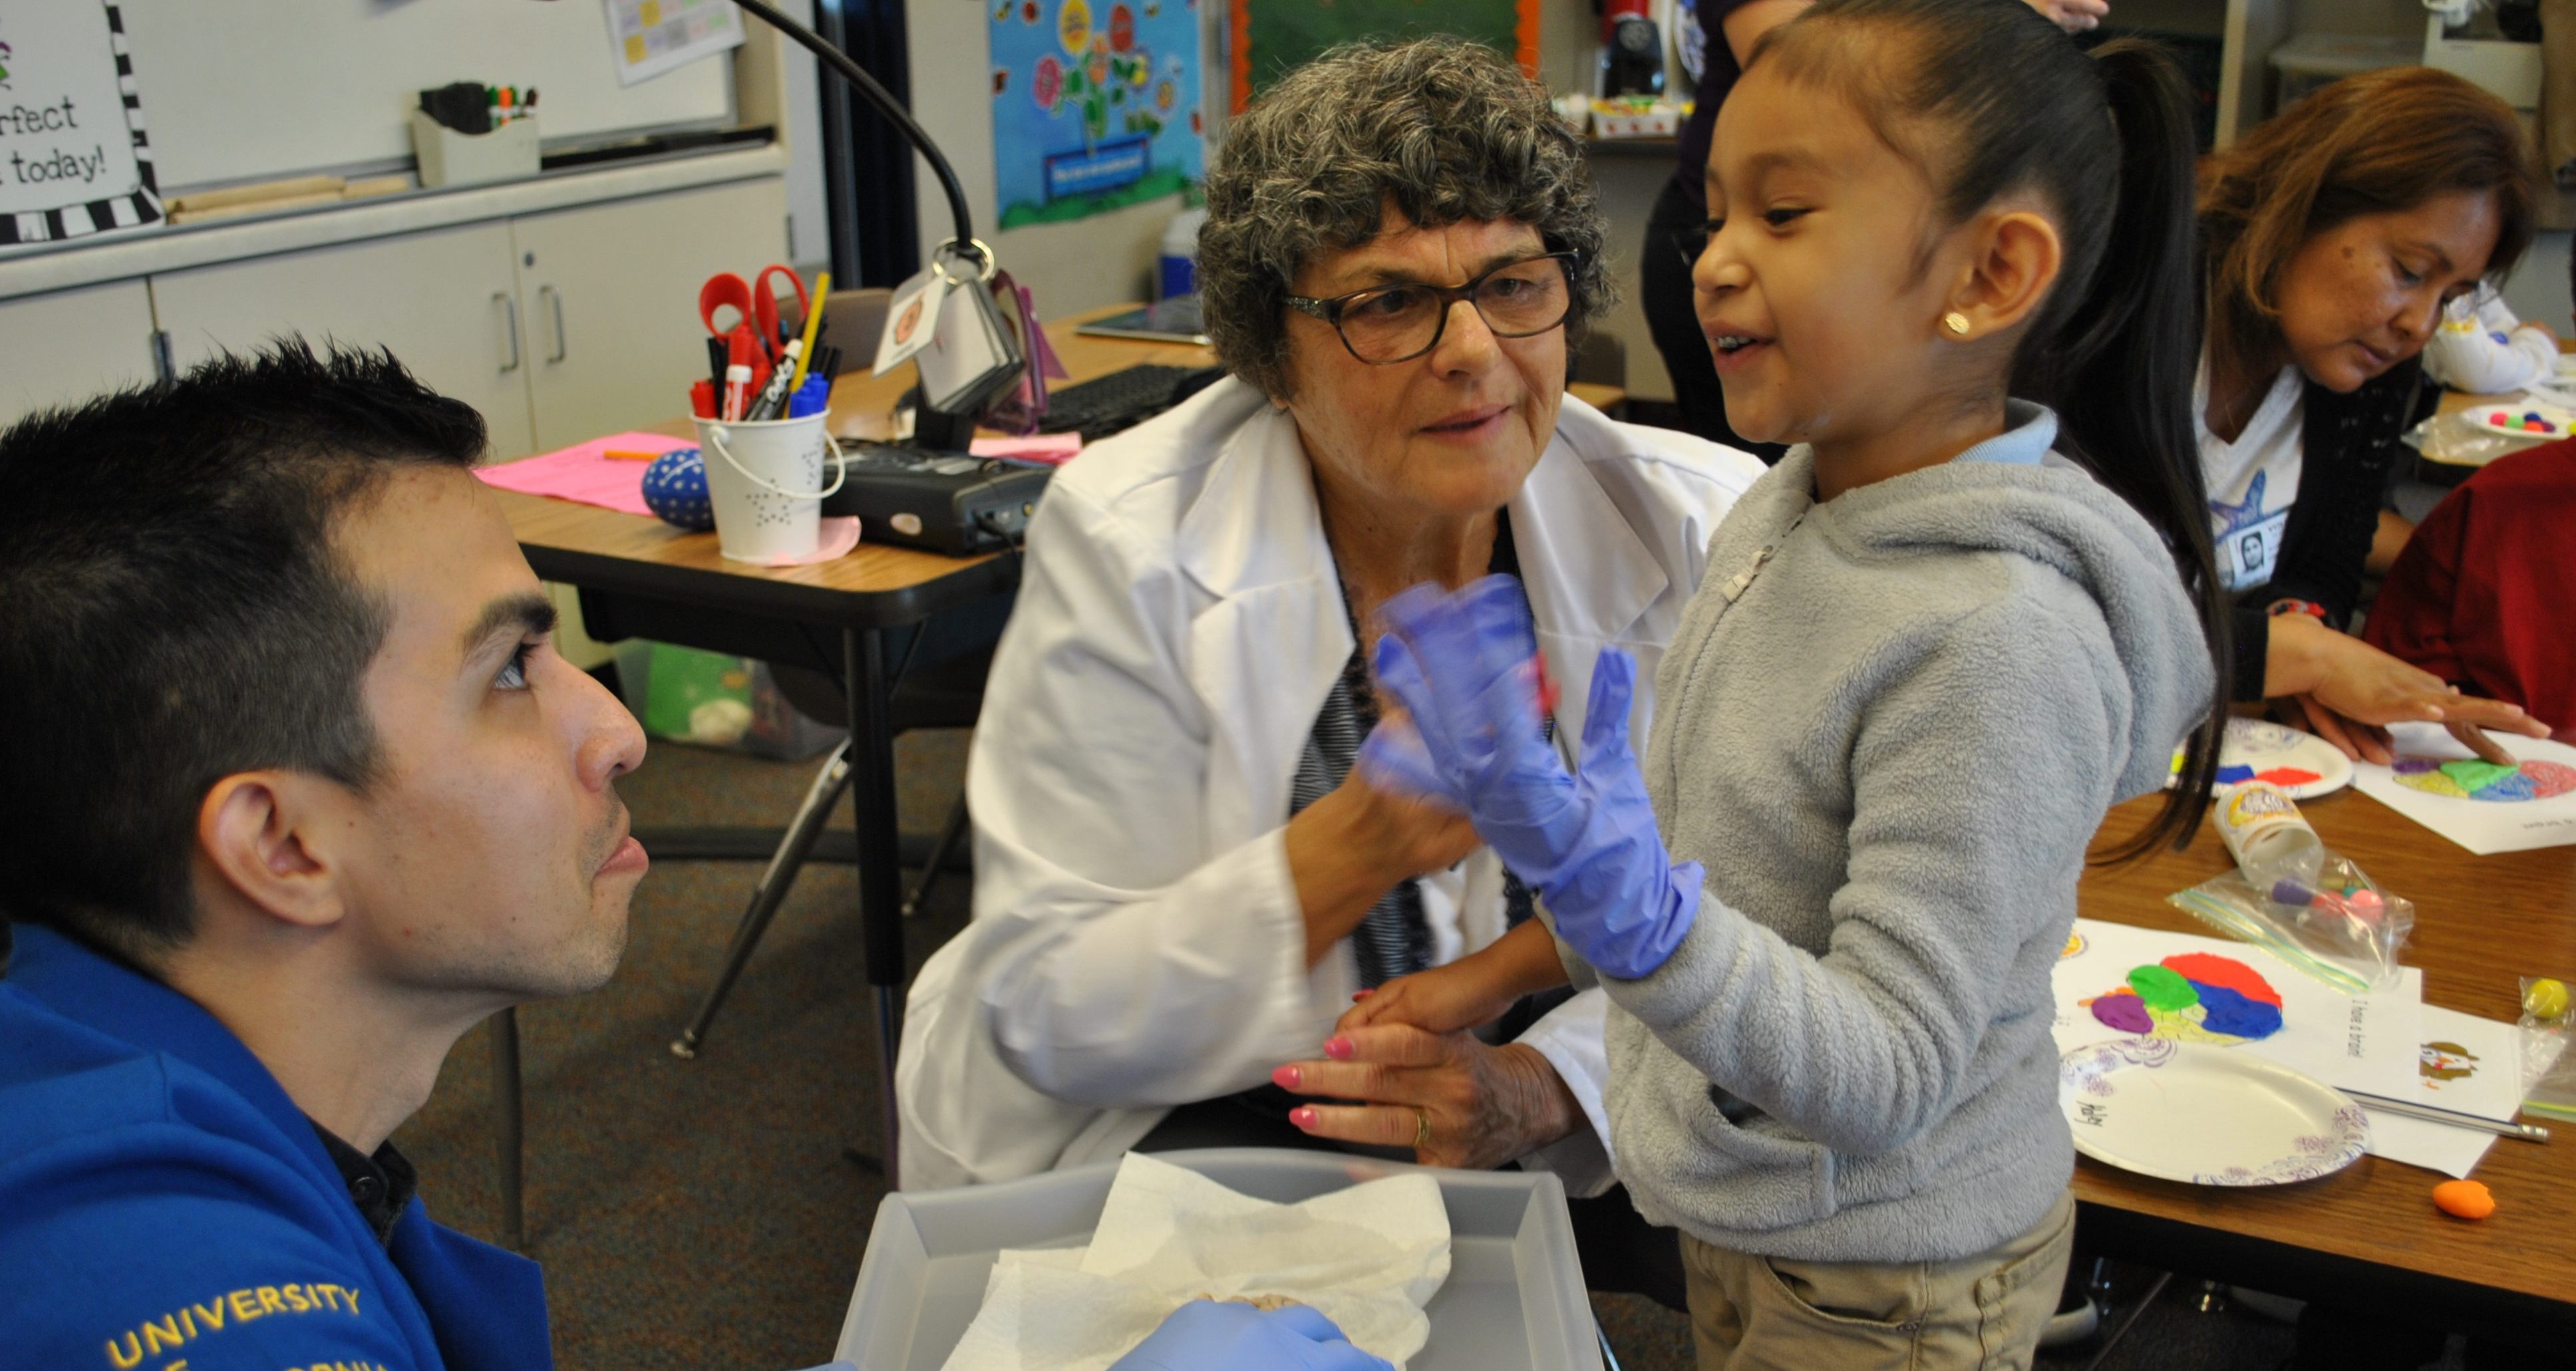 UCI Brain Research is shared by UCI Brain experts at local elementary school